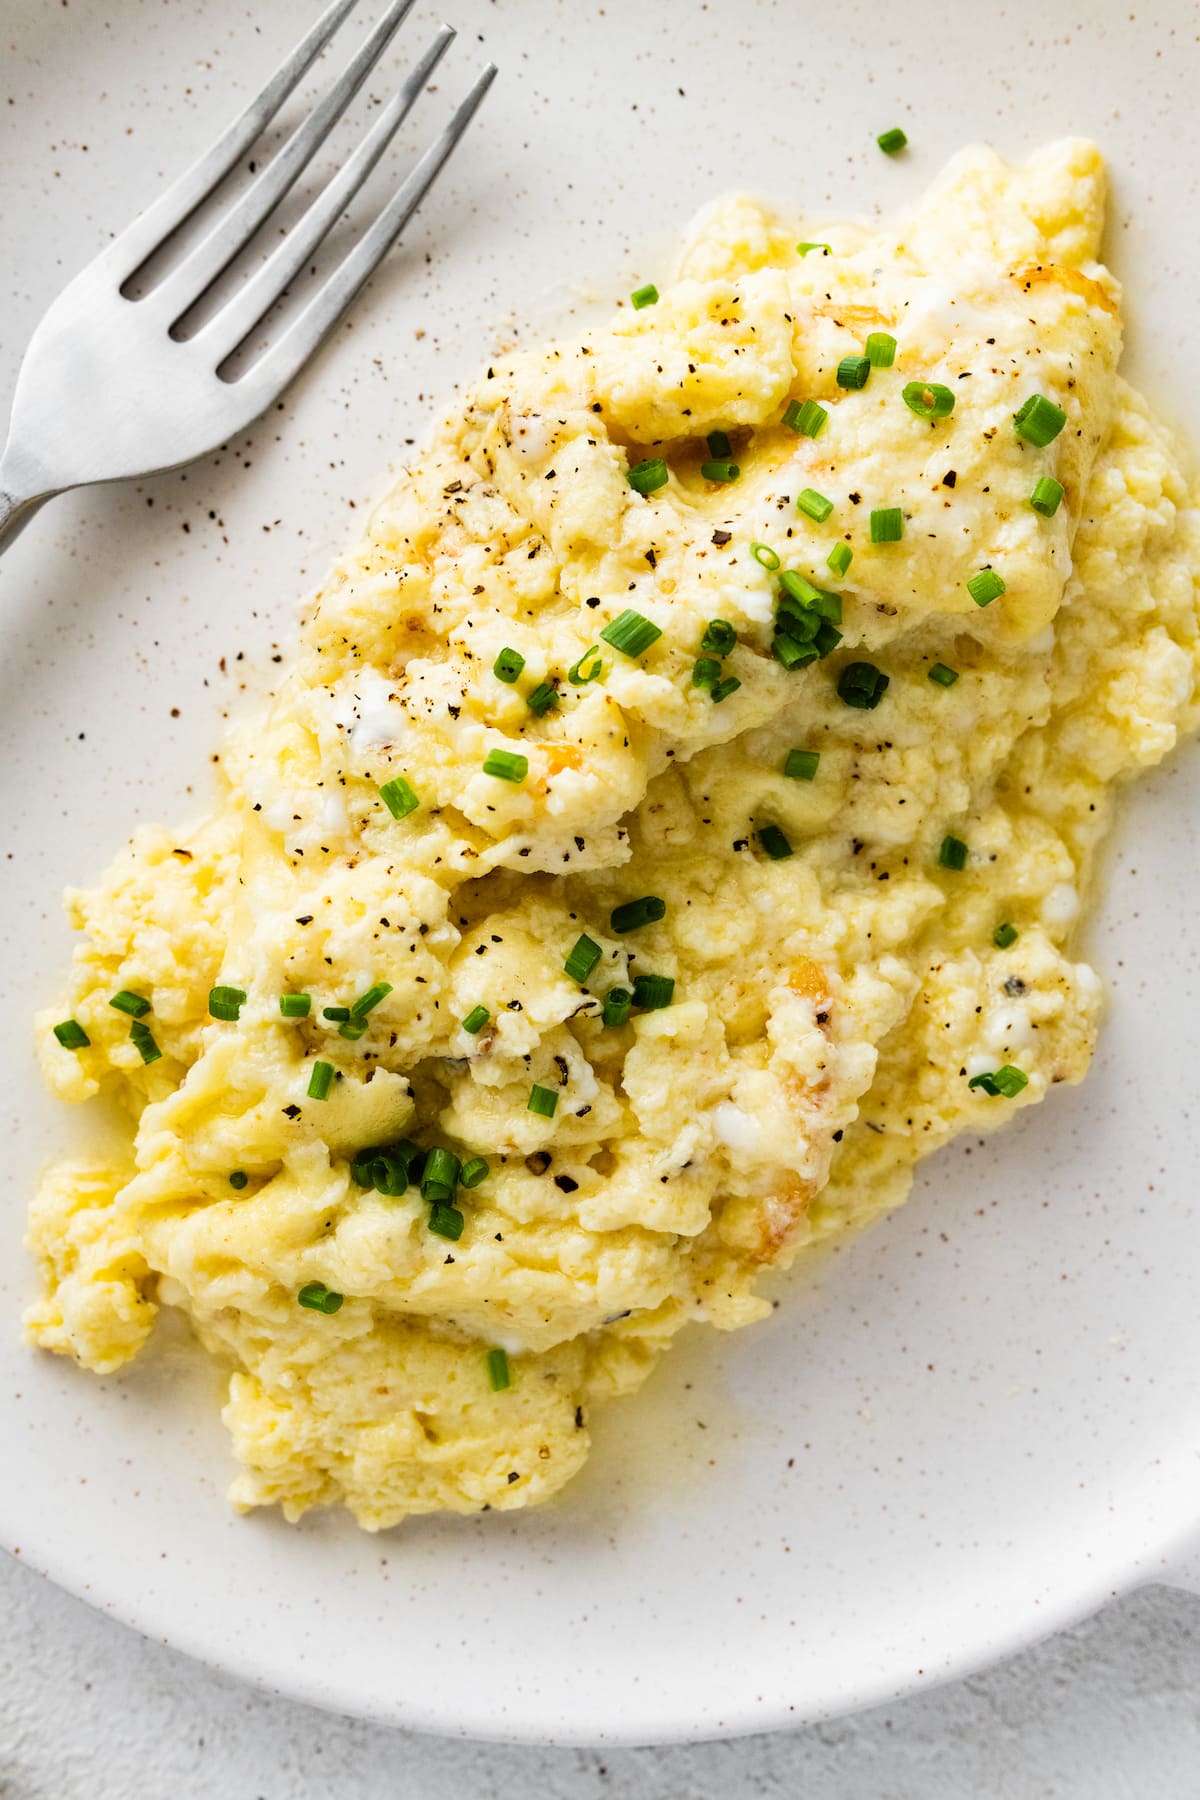 Cottage cheese scrambled eggs on a plate garnished with fresh chives, salt, and pepper.